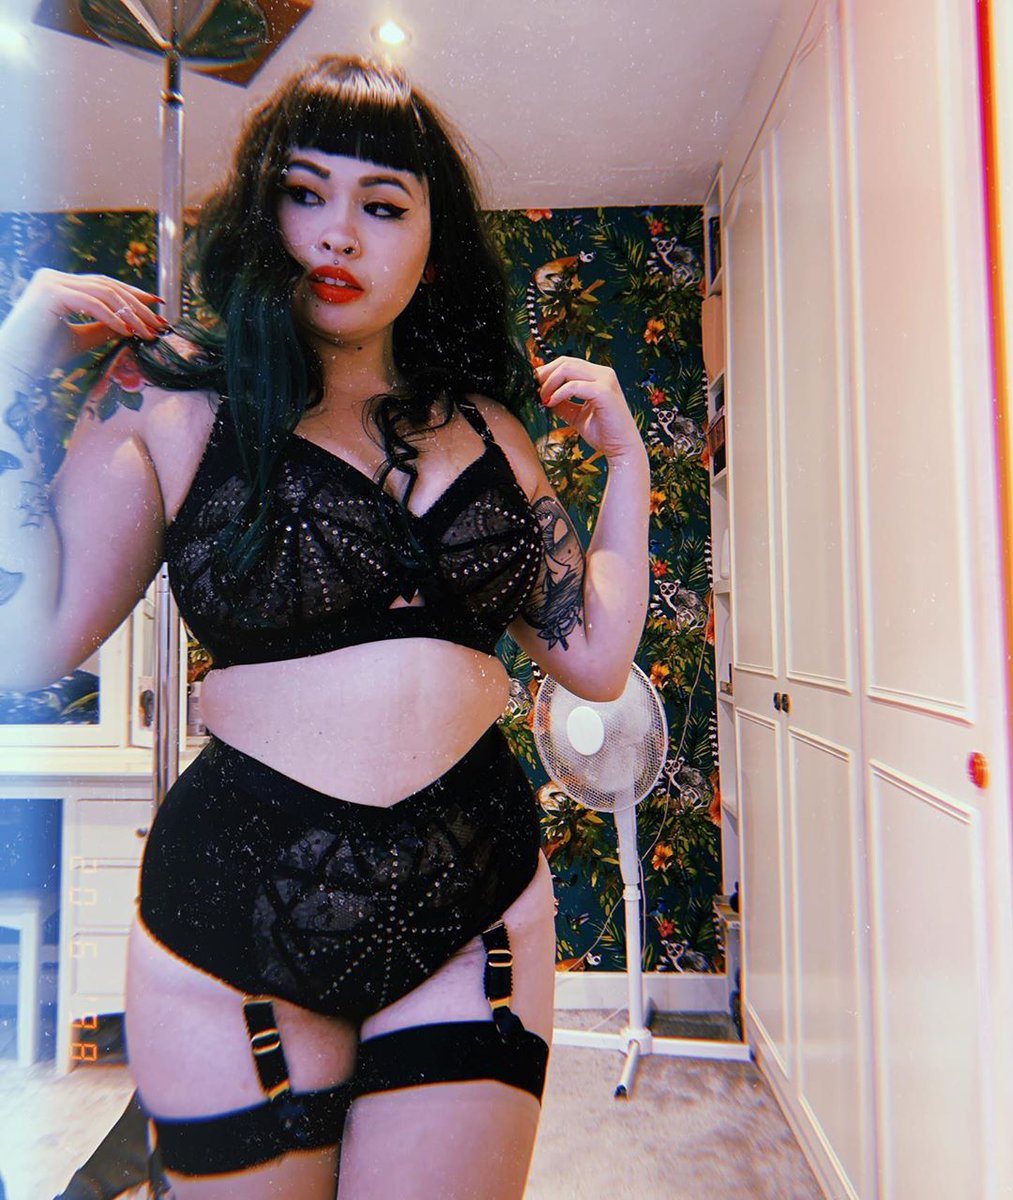 Skole lærer Soak mudder Agent Provocateur på Twitter: "hexedboudoirbabycloset wears Franni from our  summer sale. Extra 15% off ends soon! Don't miss out...use code EXTRA15  in-store and online https://t.co/mRmYqDoe4J… https://t.co/t2o5oZP0x7"